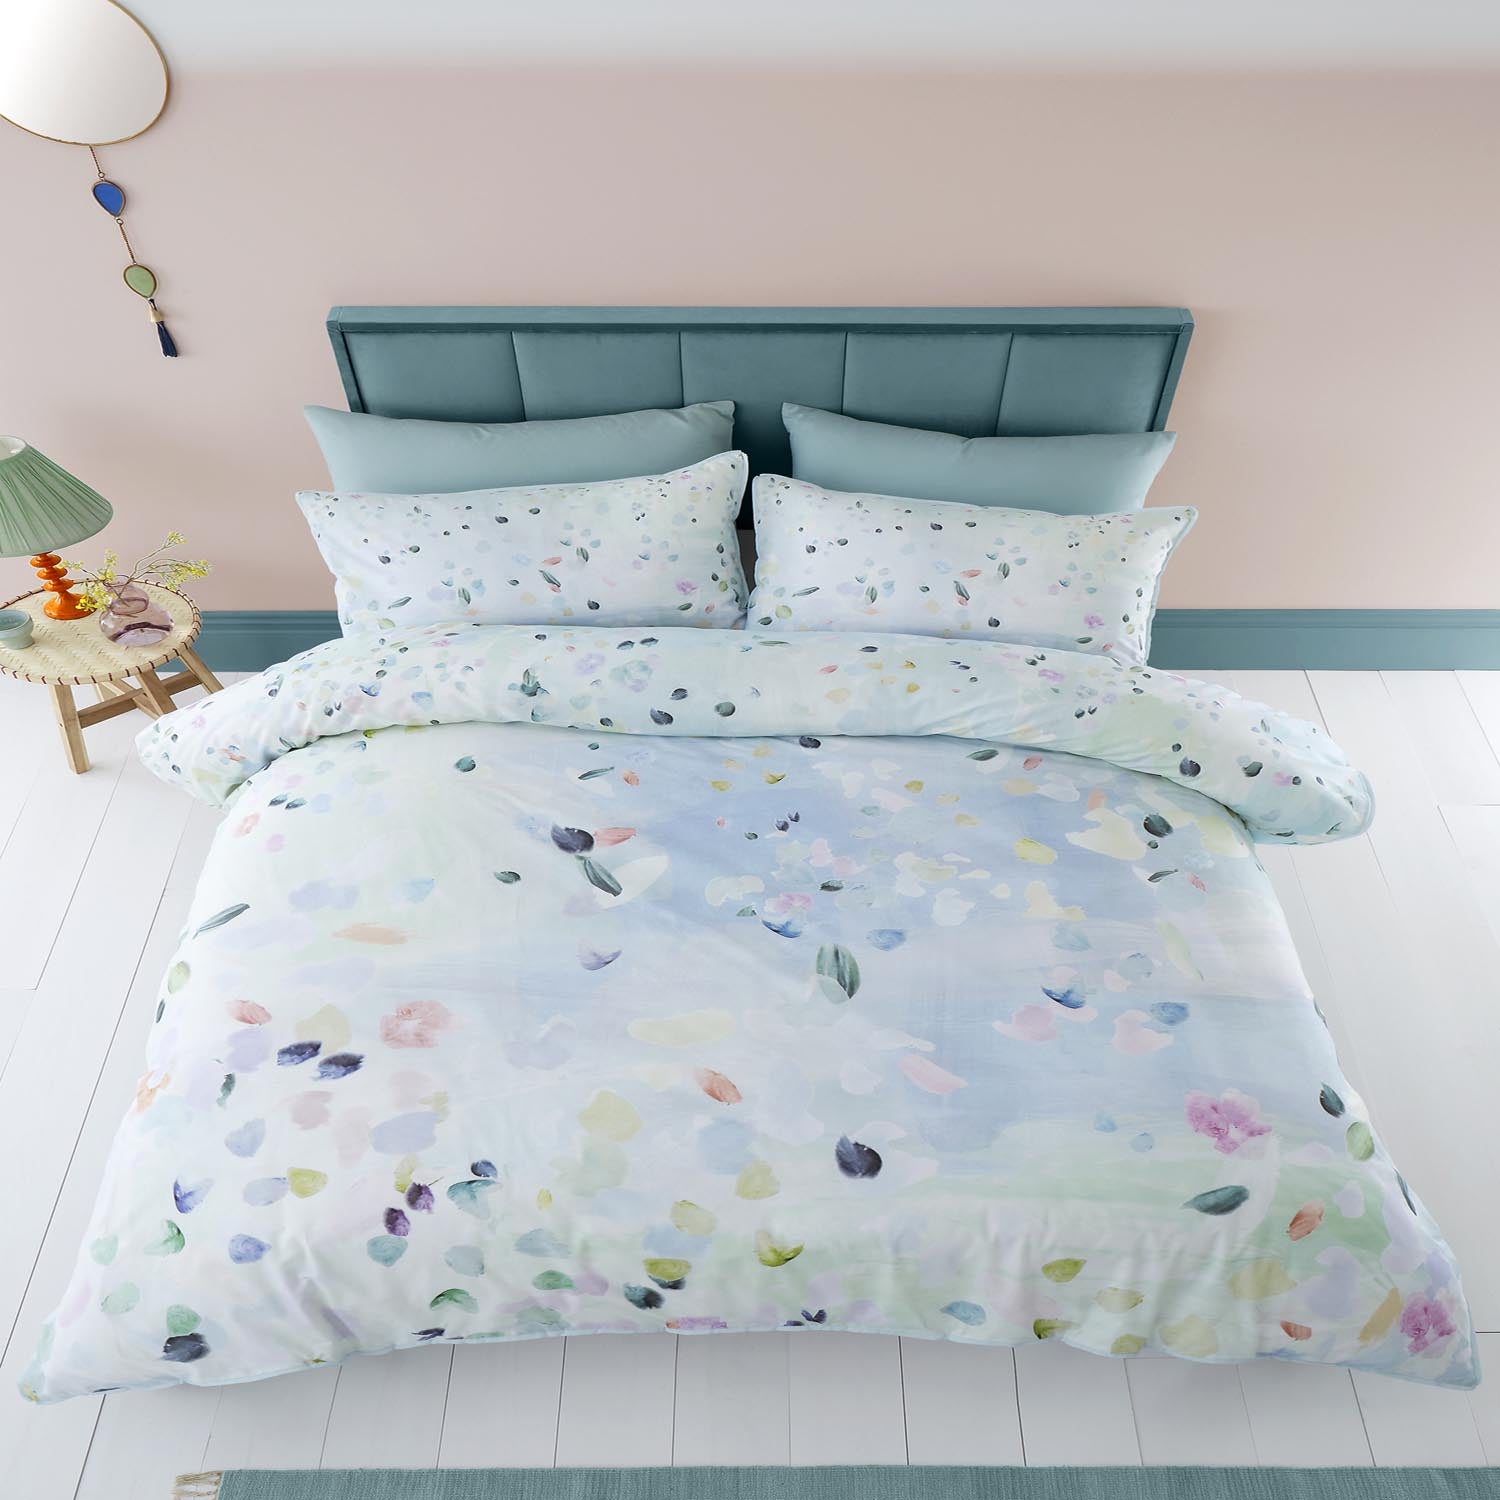  The Home Luxury Collection Aspen Blue Duvet Cover Set 2 Shaws Department Stores